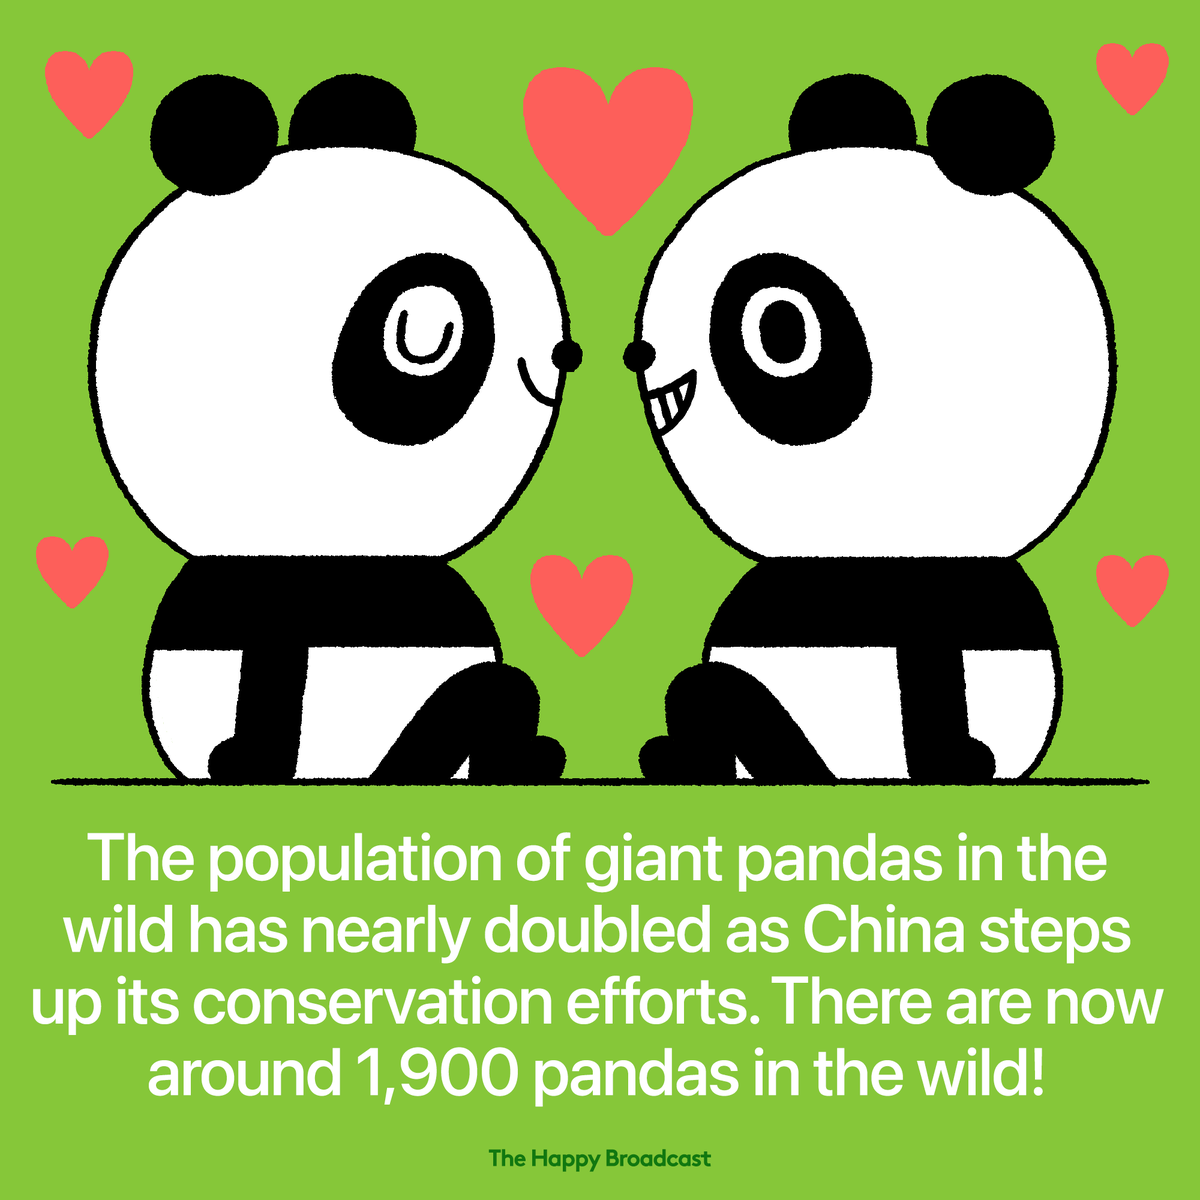 According to China’s National Forestry and Grassland Administration, the total number of giant pandas increased from 1,100 in the 1980s to 1,900, marking a significant victory for wildlife conservation. Read more: thehappybroadcast.com/news/giant-pan… #panda #conservation #wildlife